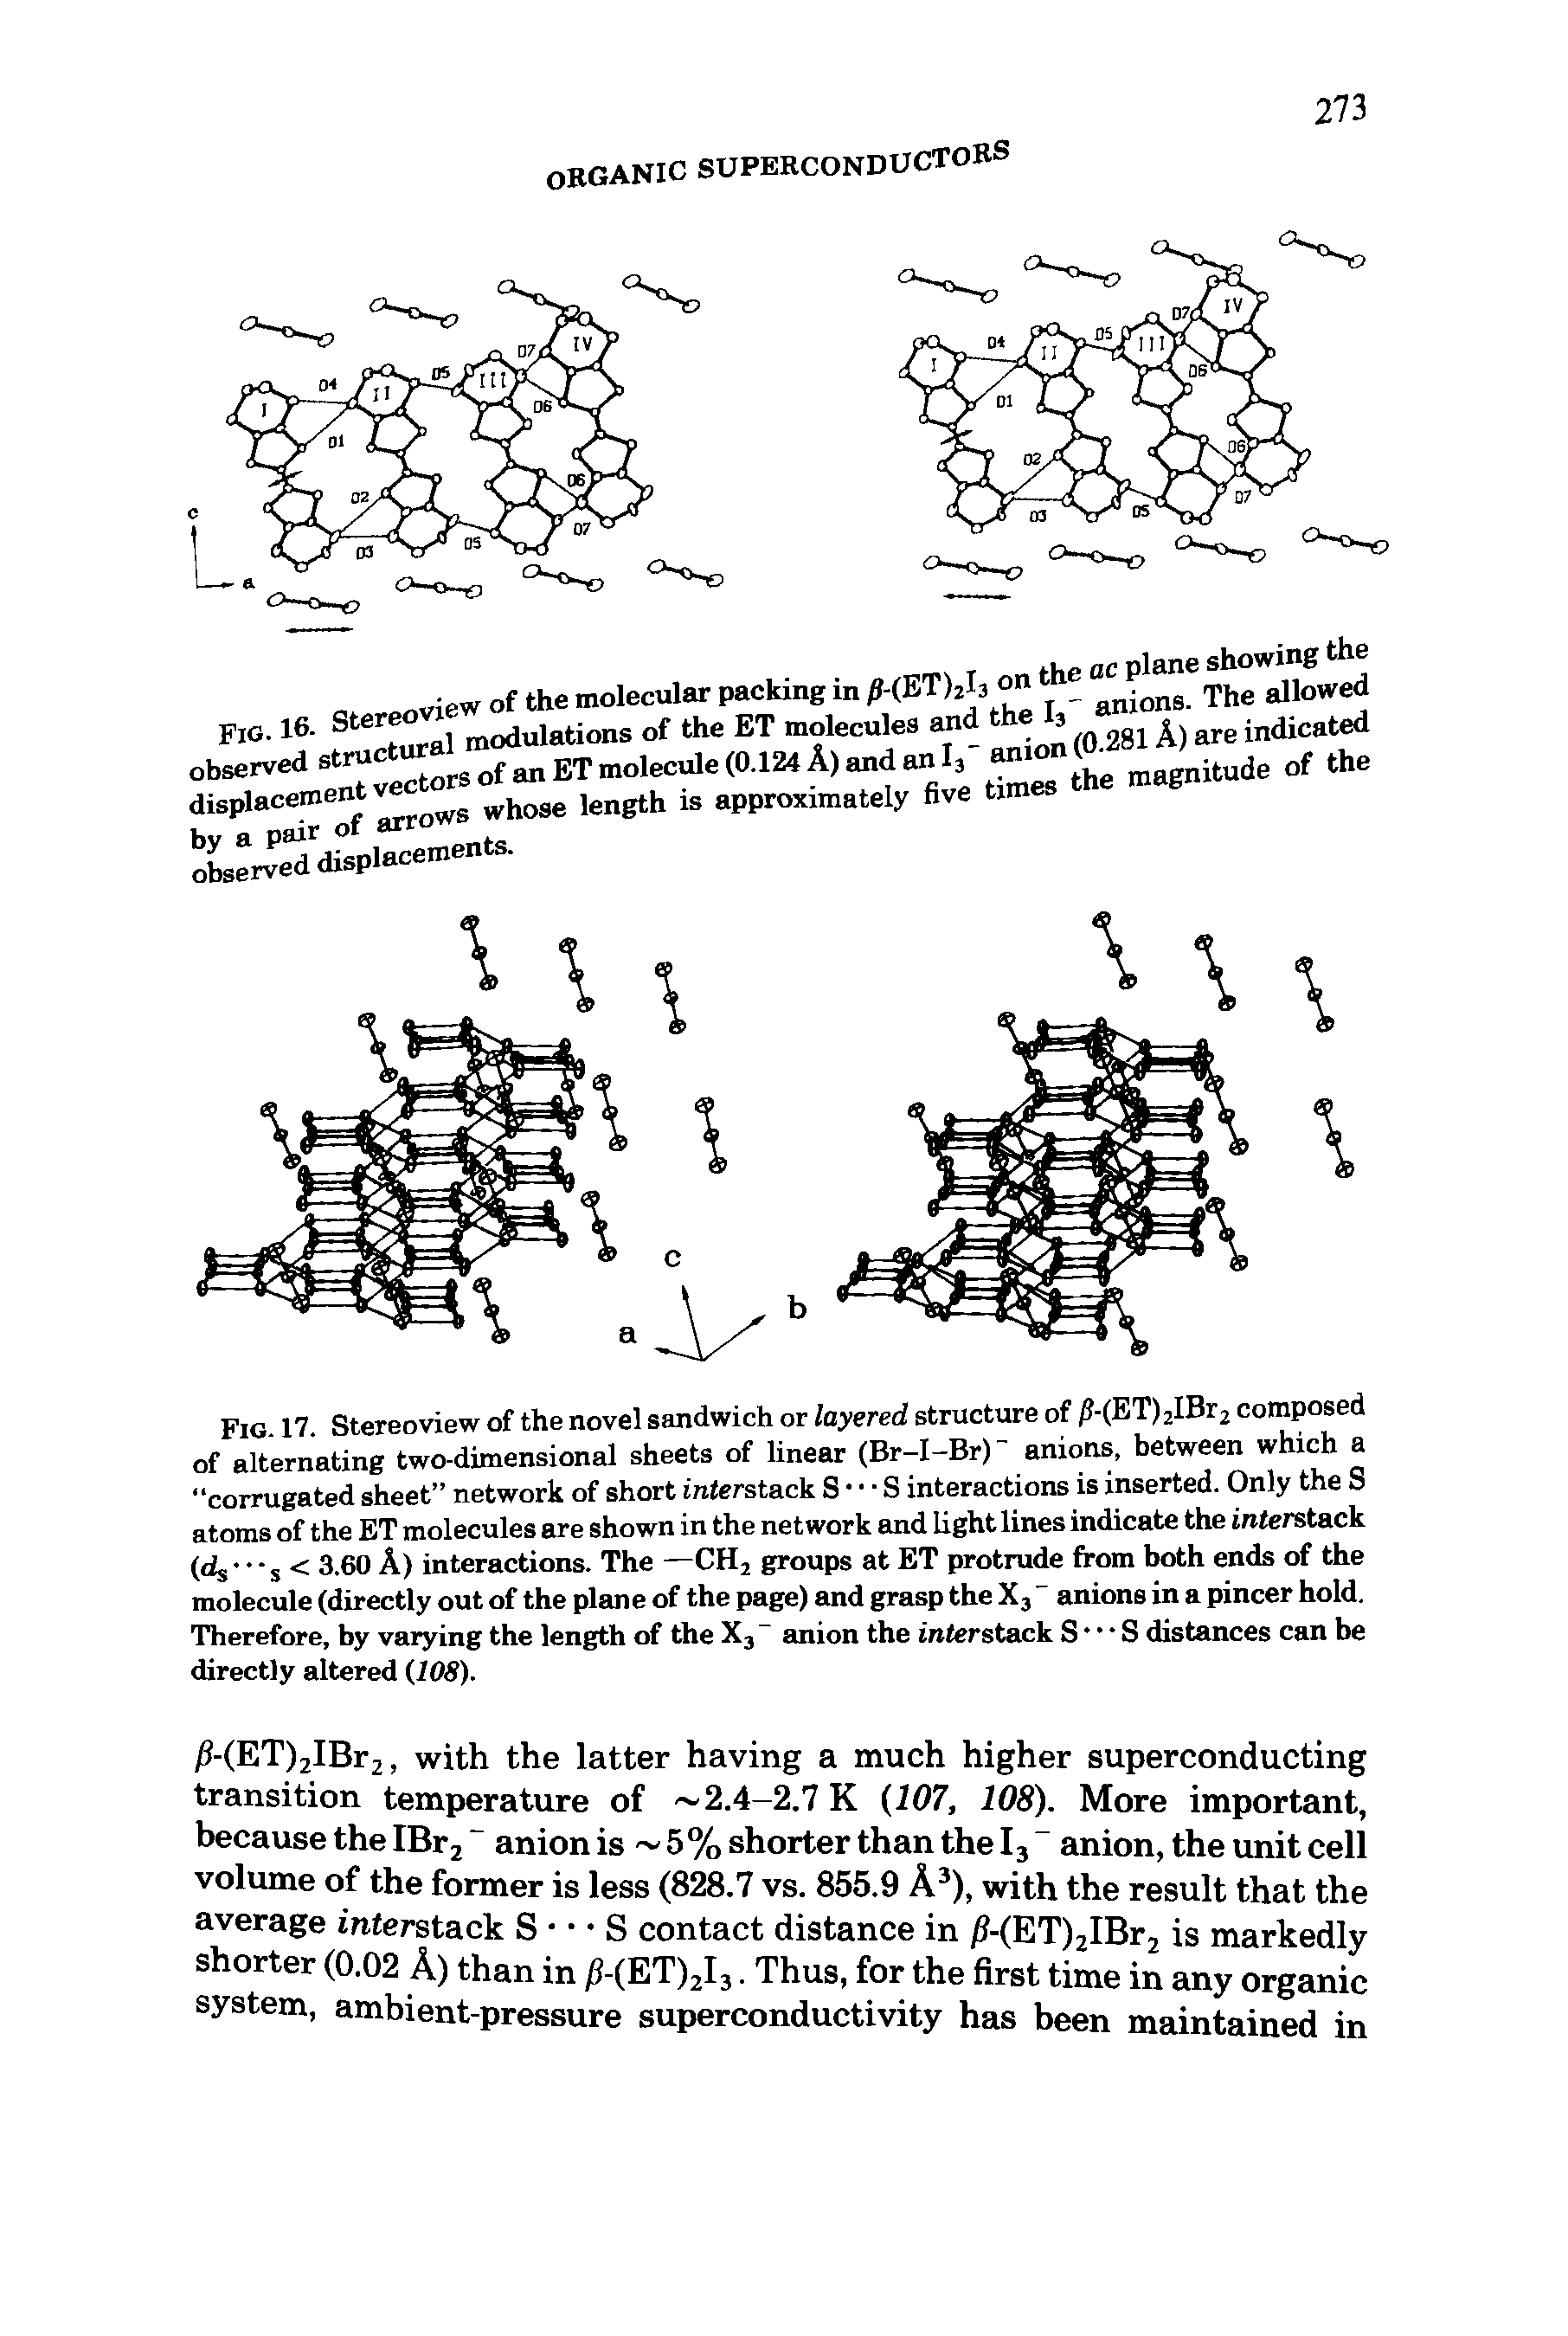 Fig. 17. Stereoview of the novel sandwich or layered structure of / -(ET)2IBr2 composed of alternating two-dimensional sheets of linear (Br-I-Br) anions, between which a corrugated sheet network of short interstack S S interactions is inserted. Only the S atoms of the ET molecules are shown in the network and light lines indicate the interstack (ds s < 3.60 A) interactions. The —CH2 groups at ET protrude from both ends of the molecule (directly out of the plane of the page) and grasp the X3 " anions in a pincer hold. Therefore, by varying the length of the X3 " anion the interstack S S distances can be directly altered (108).